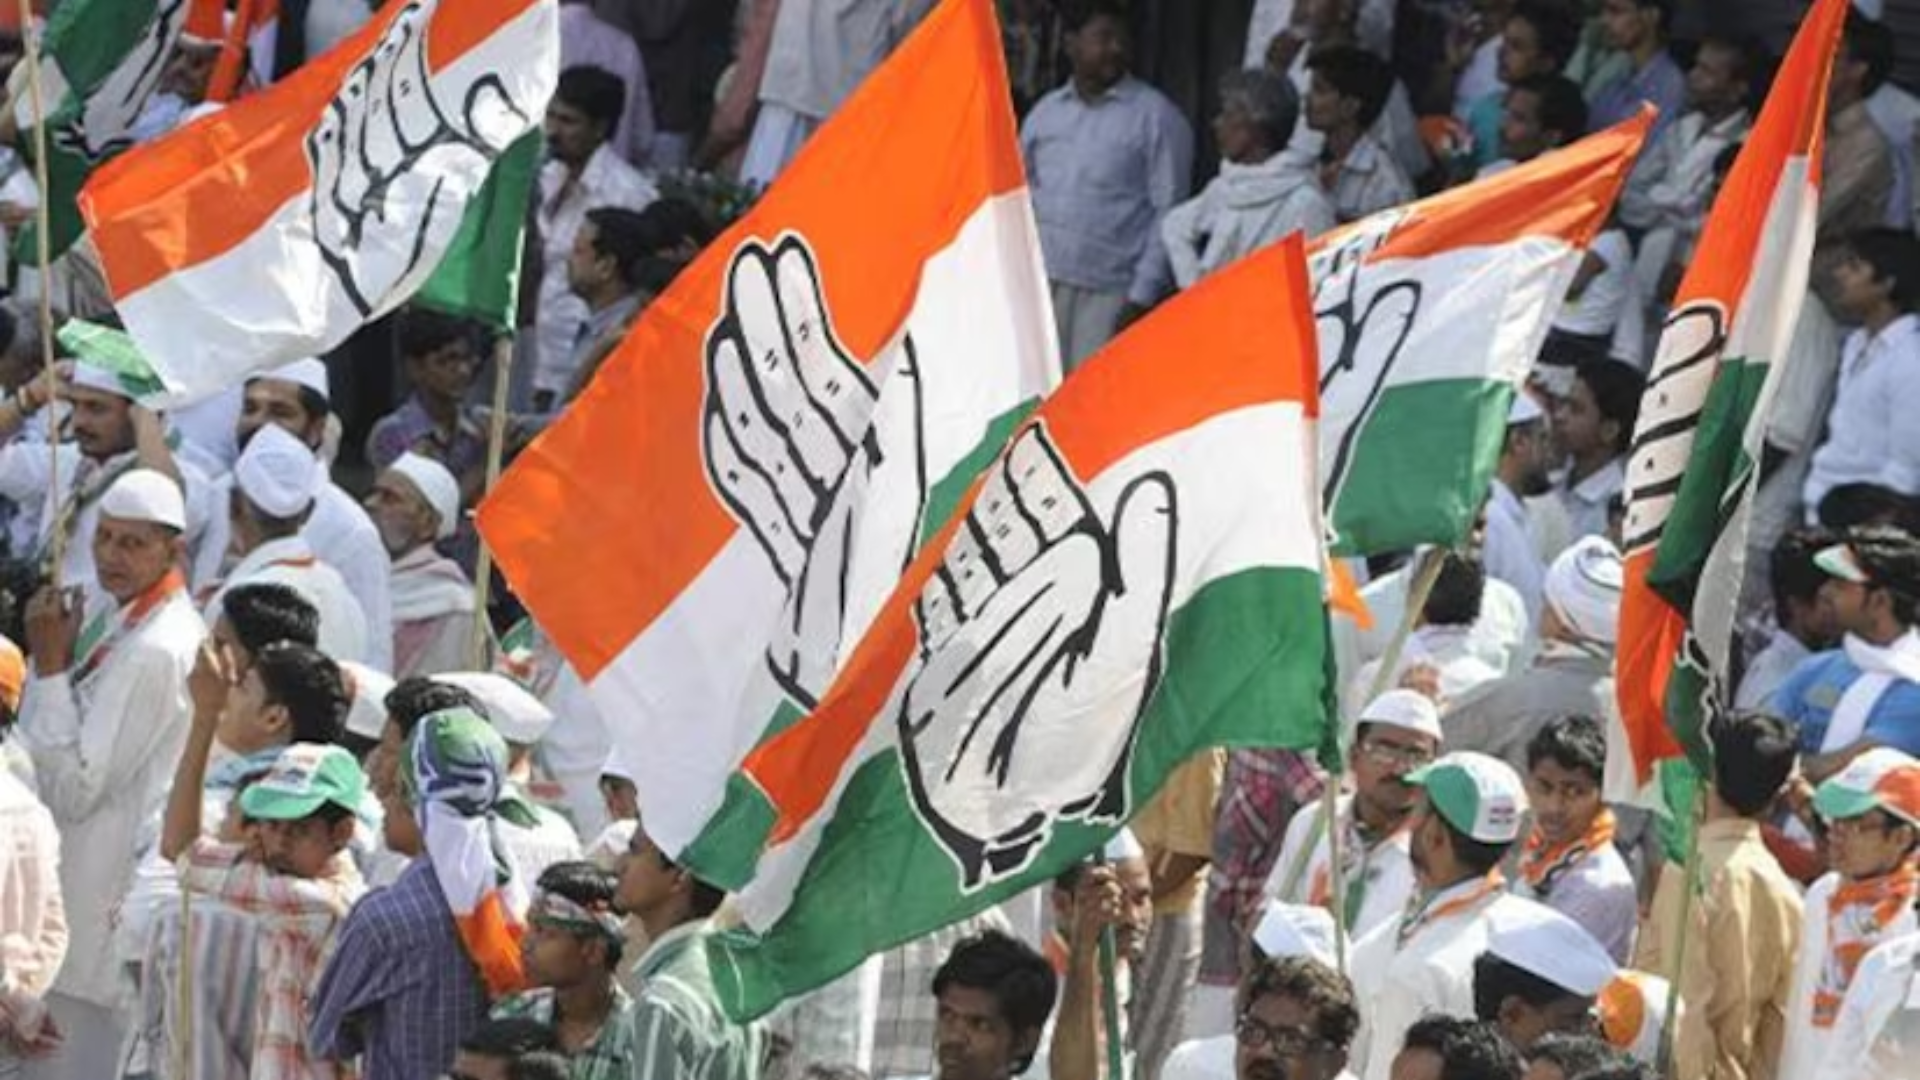 Congress Hosts Screening Committee Meeting for Rajasthan, Central Election CMS For March 7